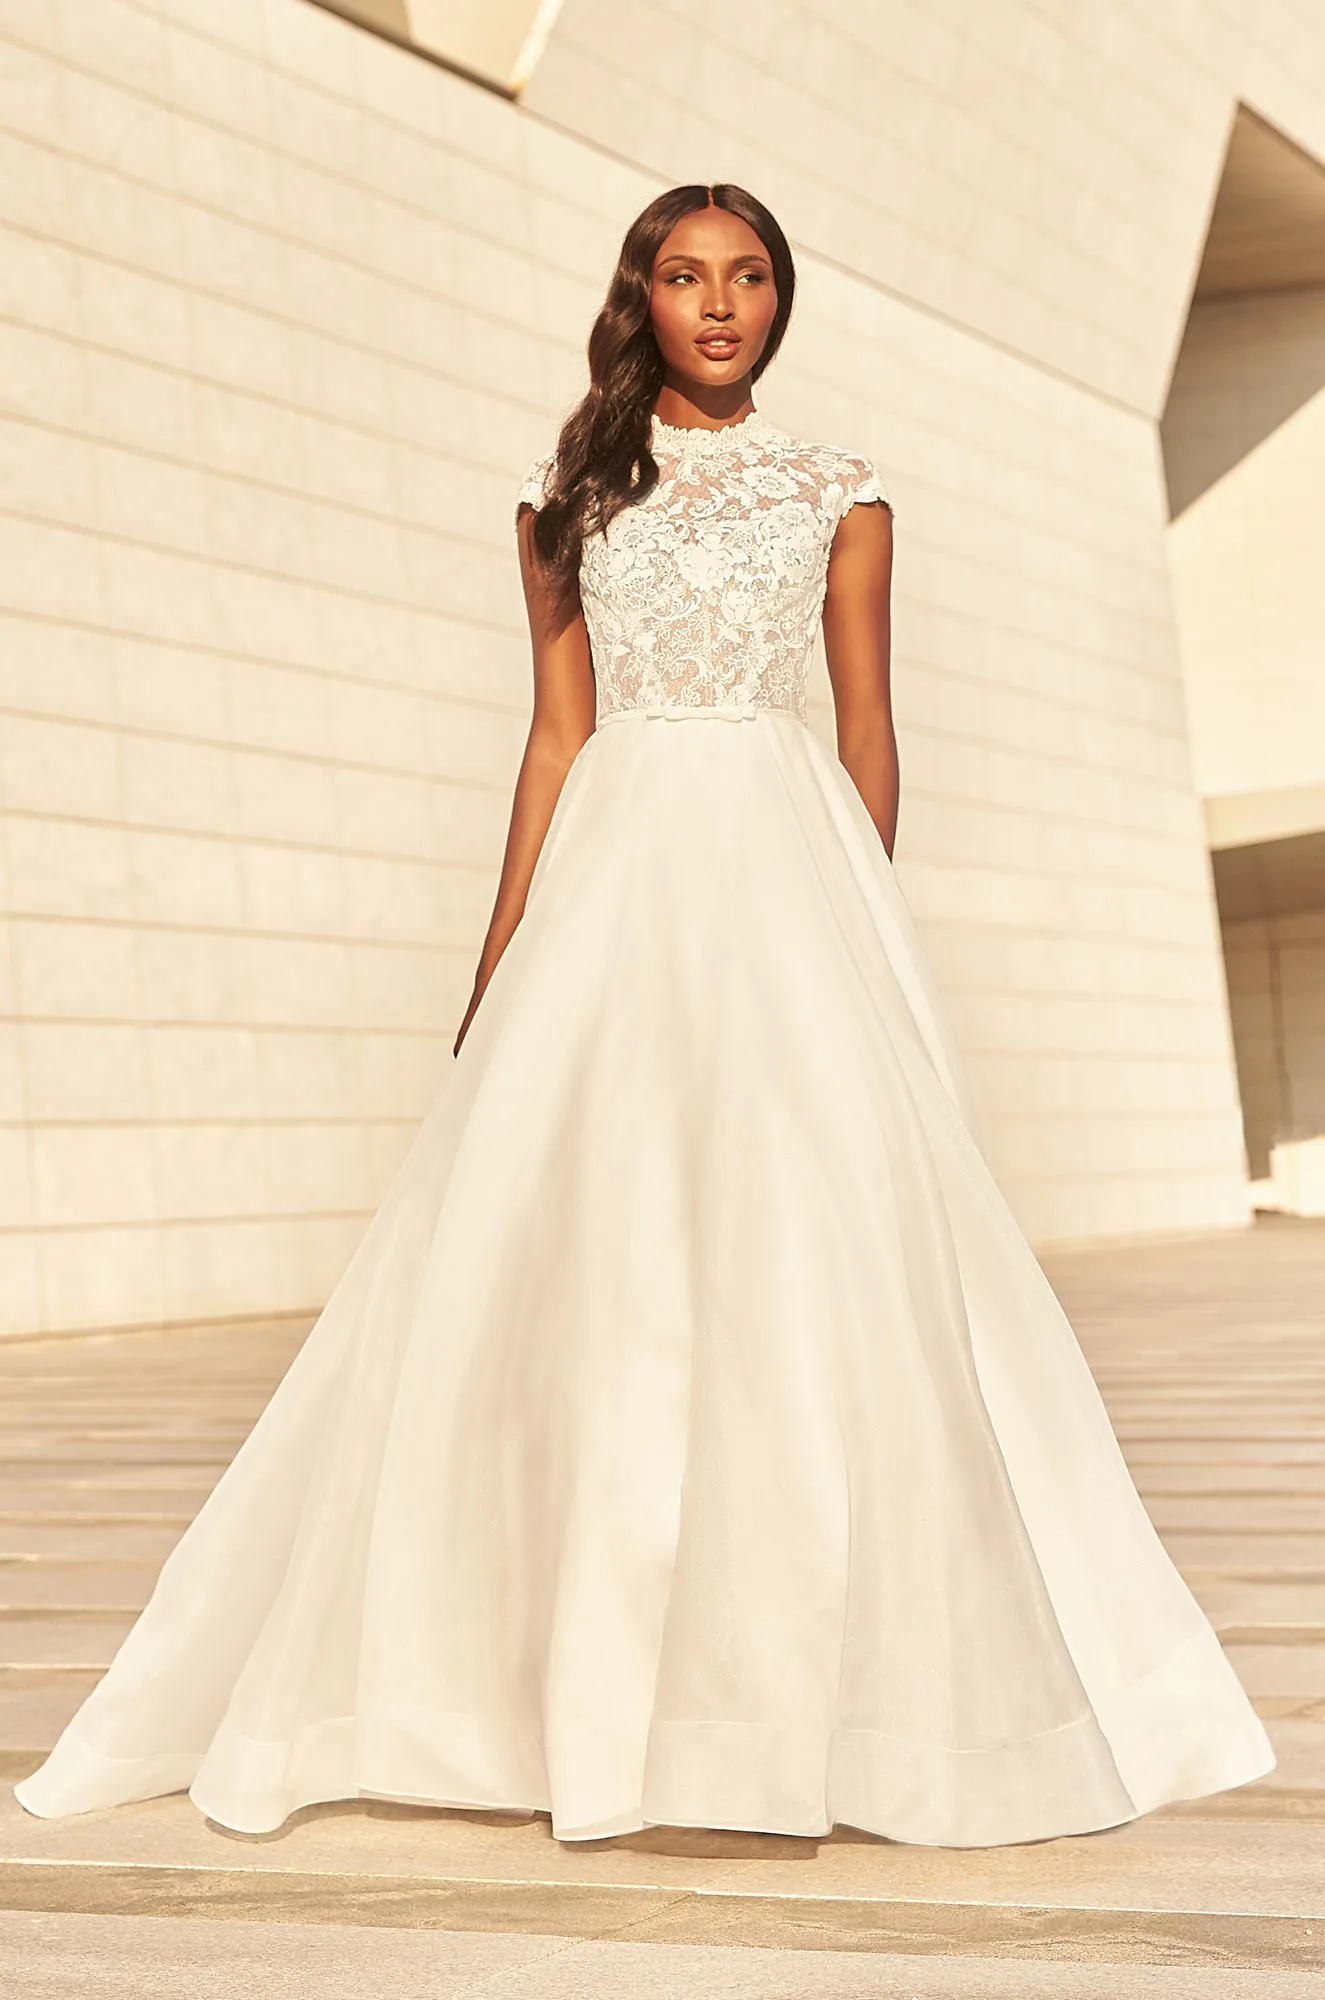 Luxury Muslim Wedding Dresses High Neck Lace Appliques Beaded Long Sleeves  Best Bridal Dresses Saudi Arabia Ball Gown Wedding Vestidos Customized From  Sexypromdress, $402.02 | DHgate.Com